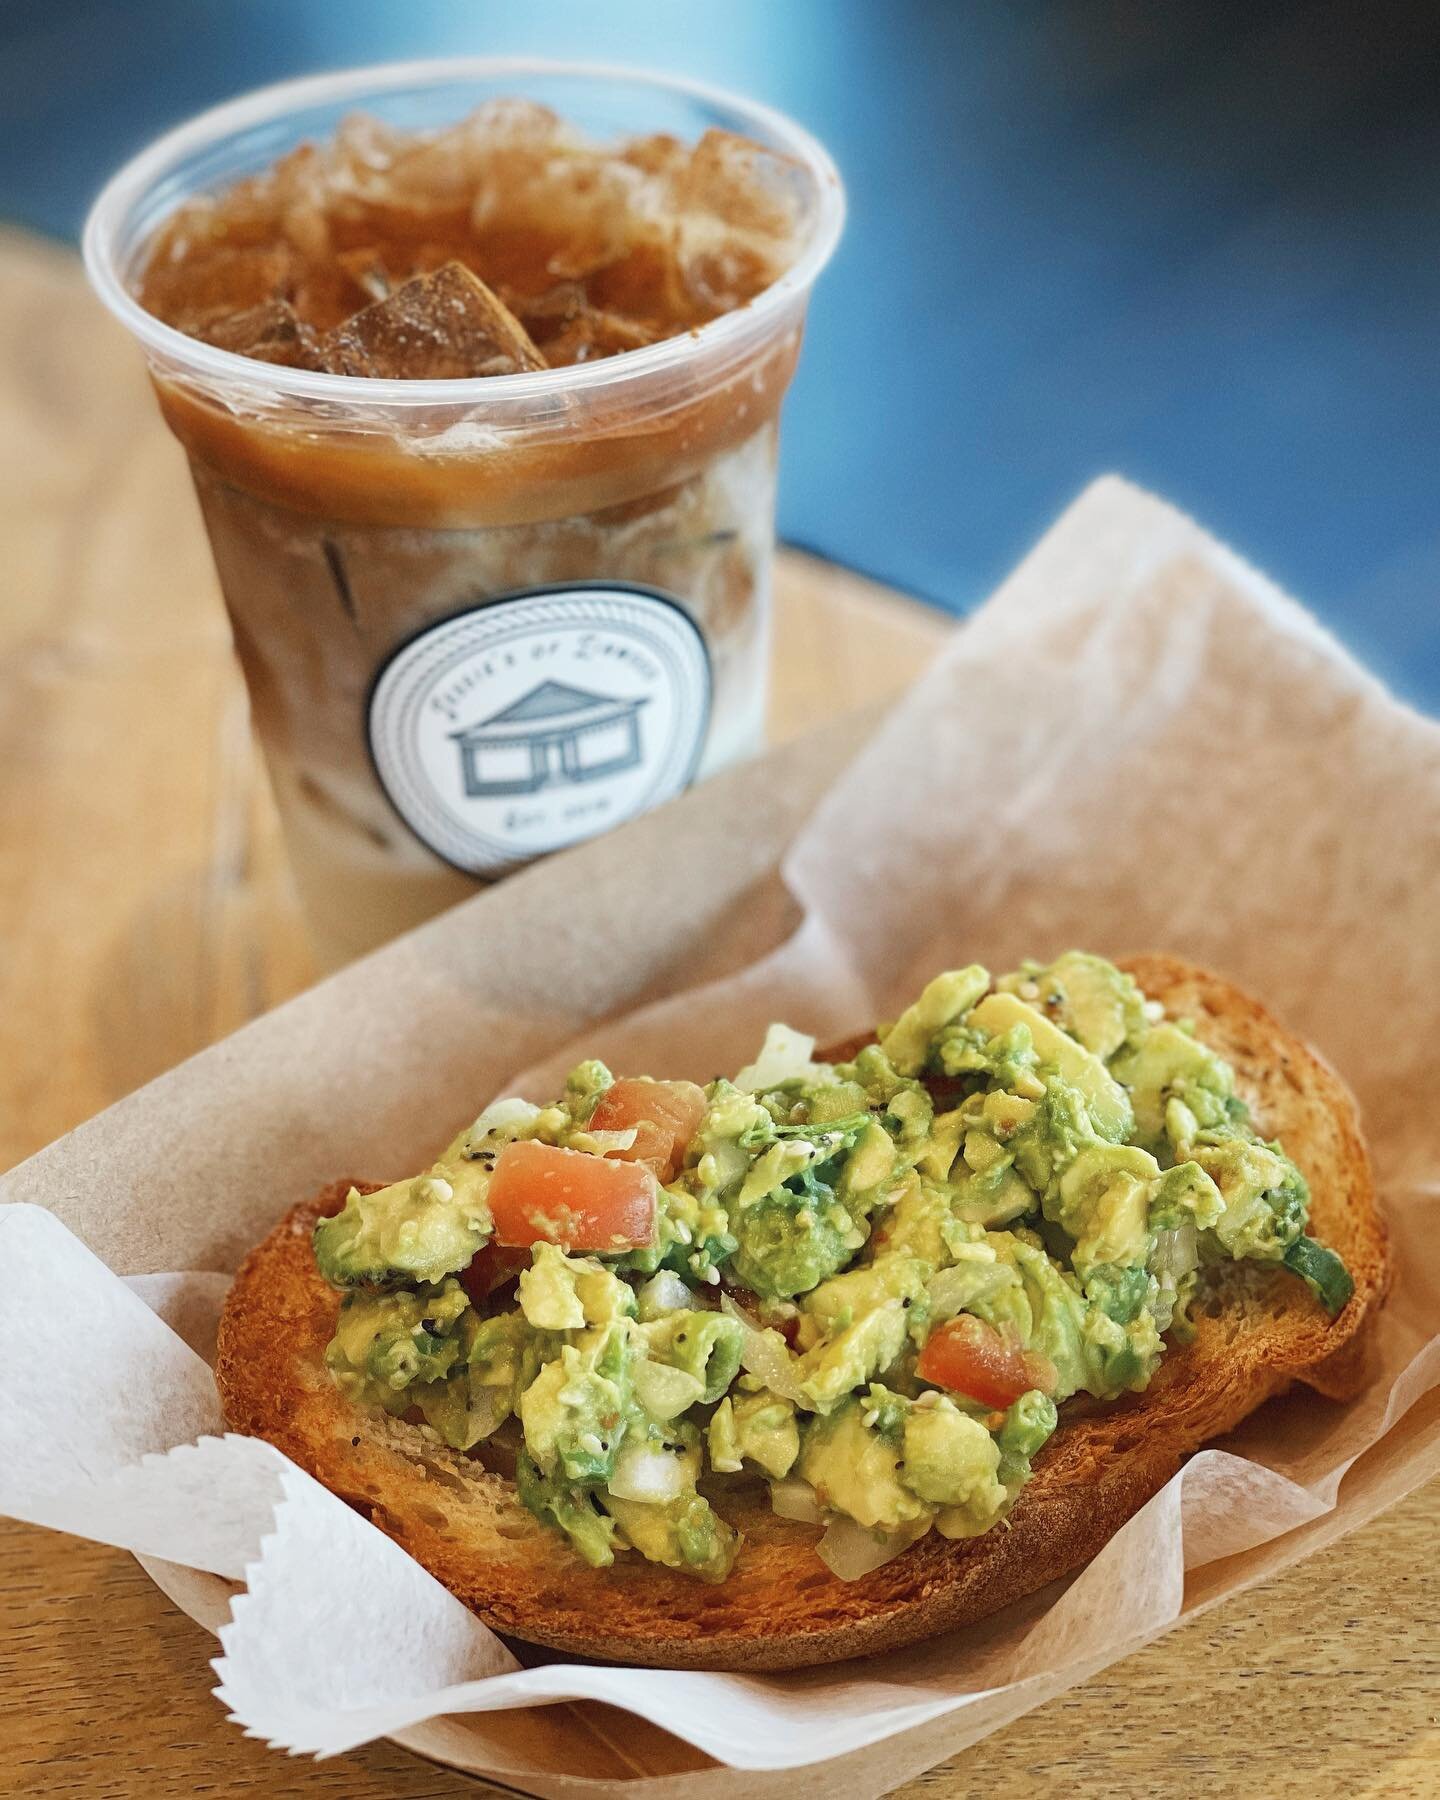 An iced oatmilk latte and our breakfast guacamole smash on crispy toast is the perfect snack today👌🏼#jessiesoflinwood #coffeecreamcommunity